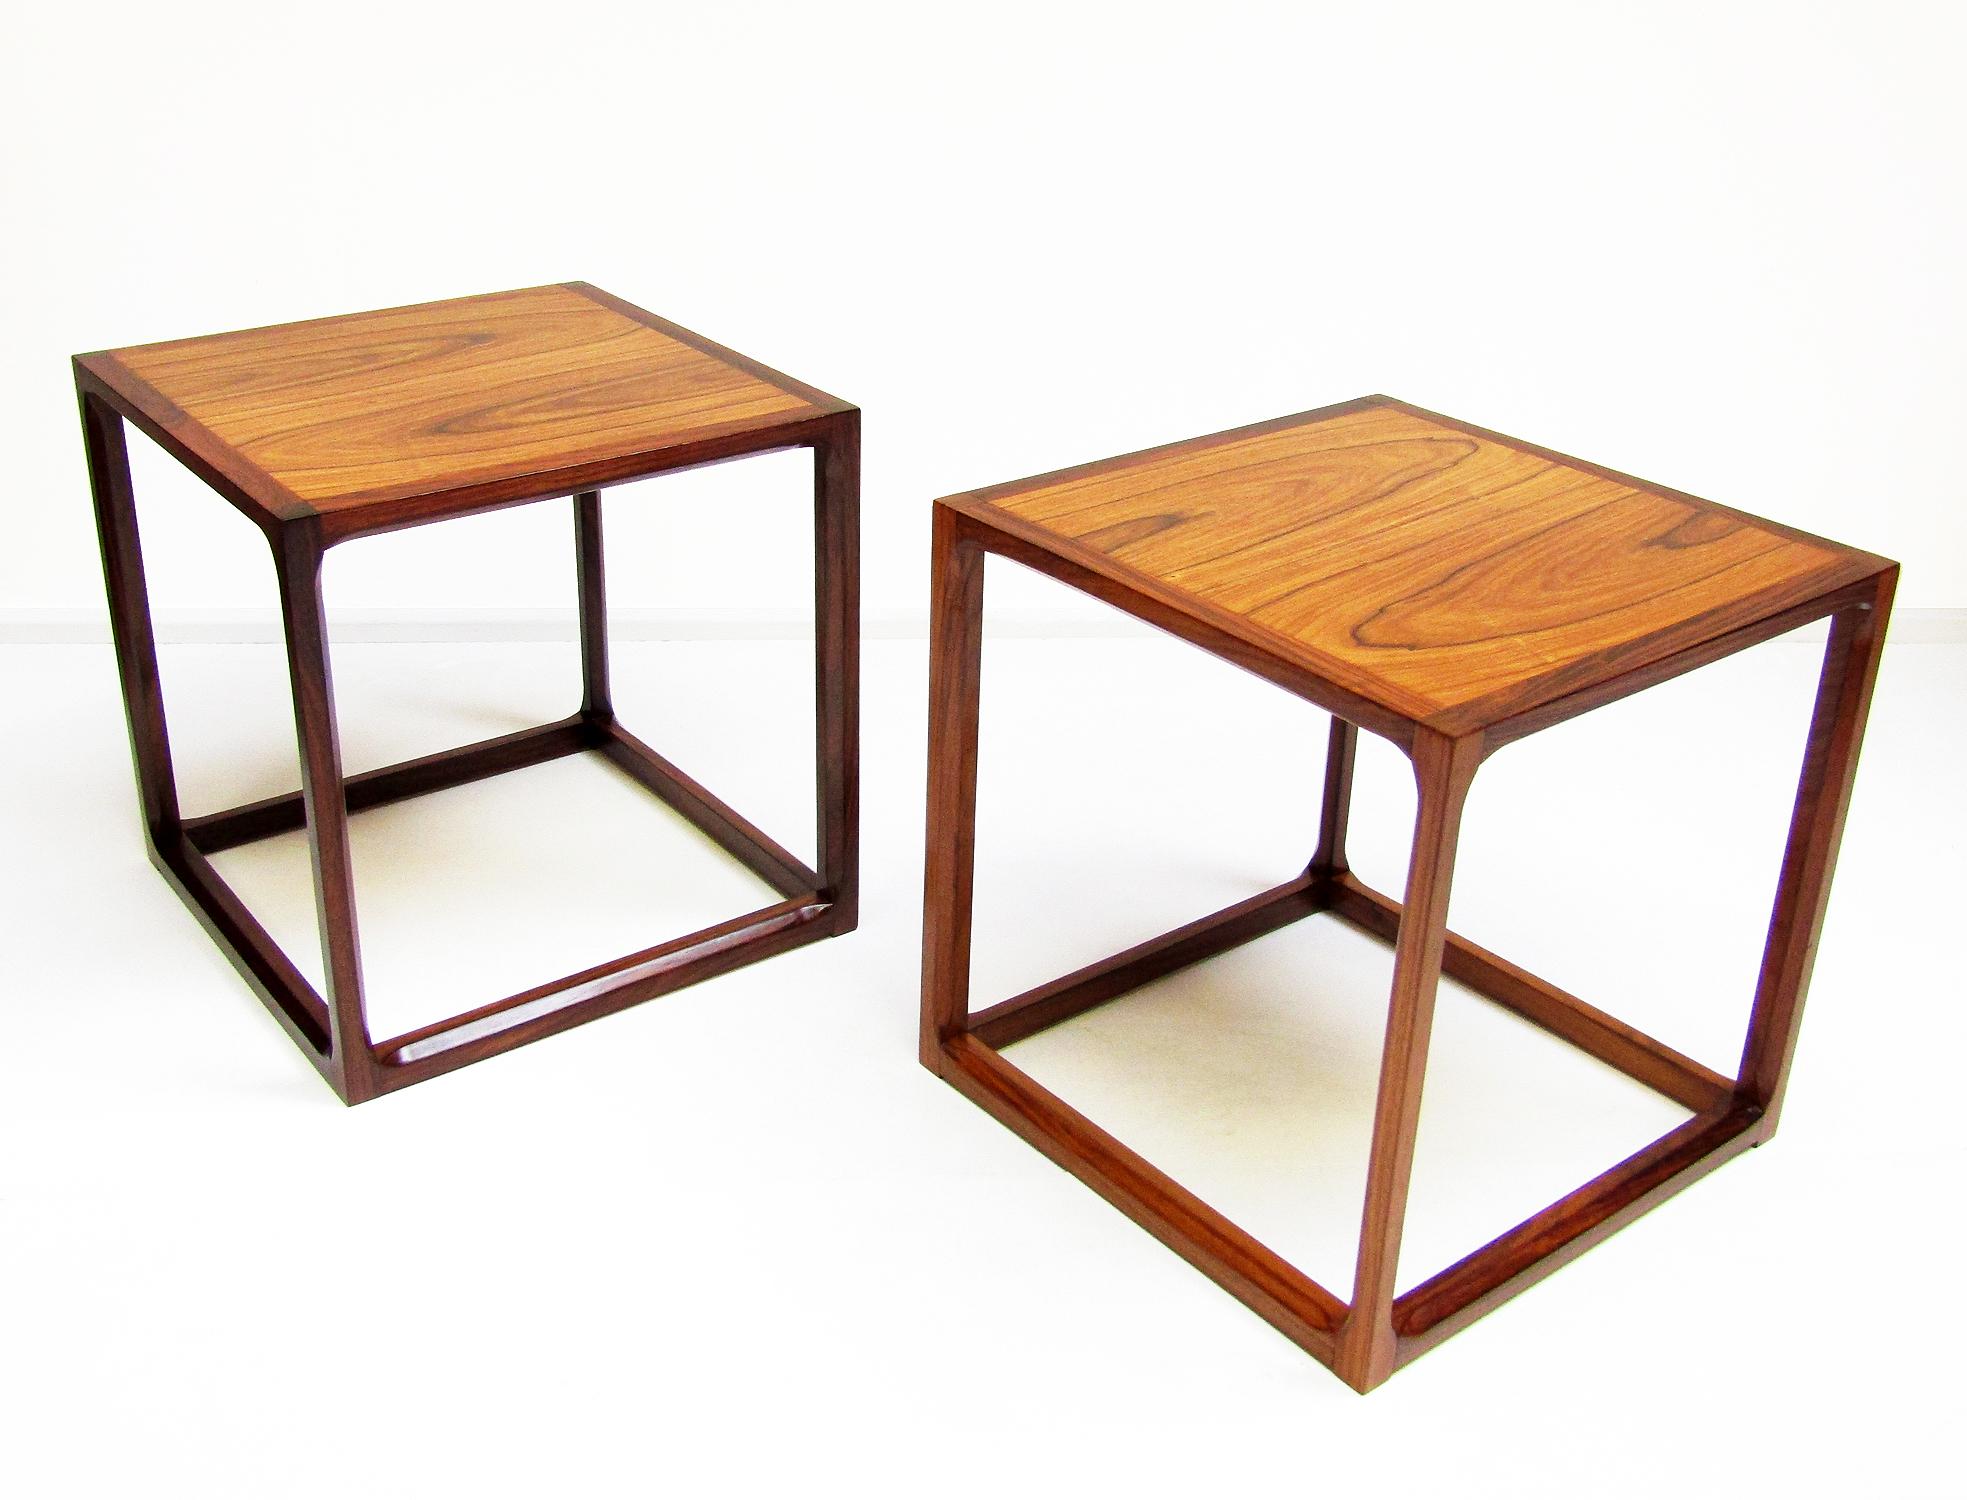 Pair of Danish Rosewood 1960s Cube Lamp Tables / Nightstands by Kai Kristiansen For Sale 1